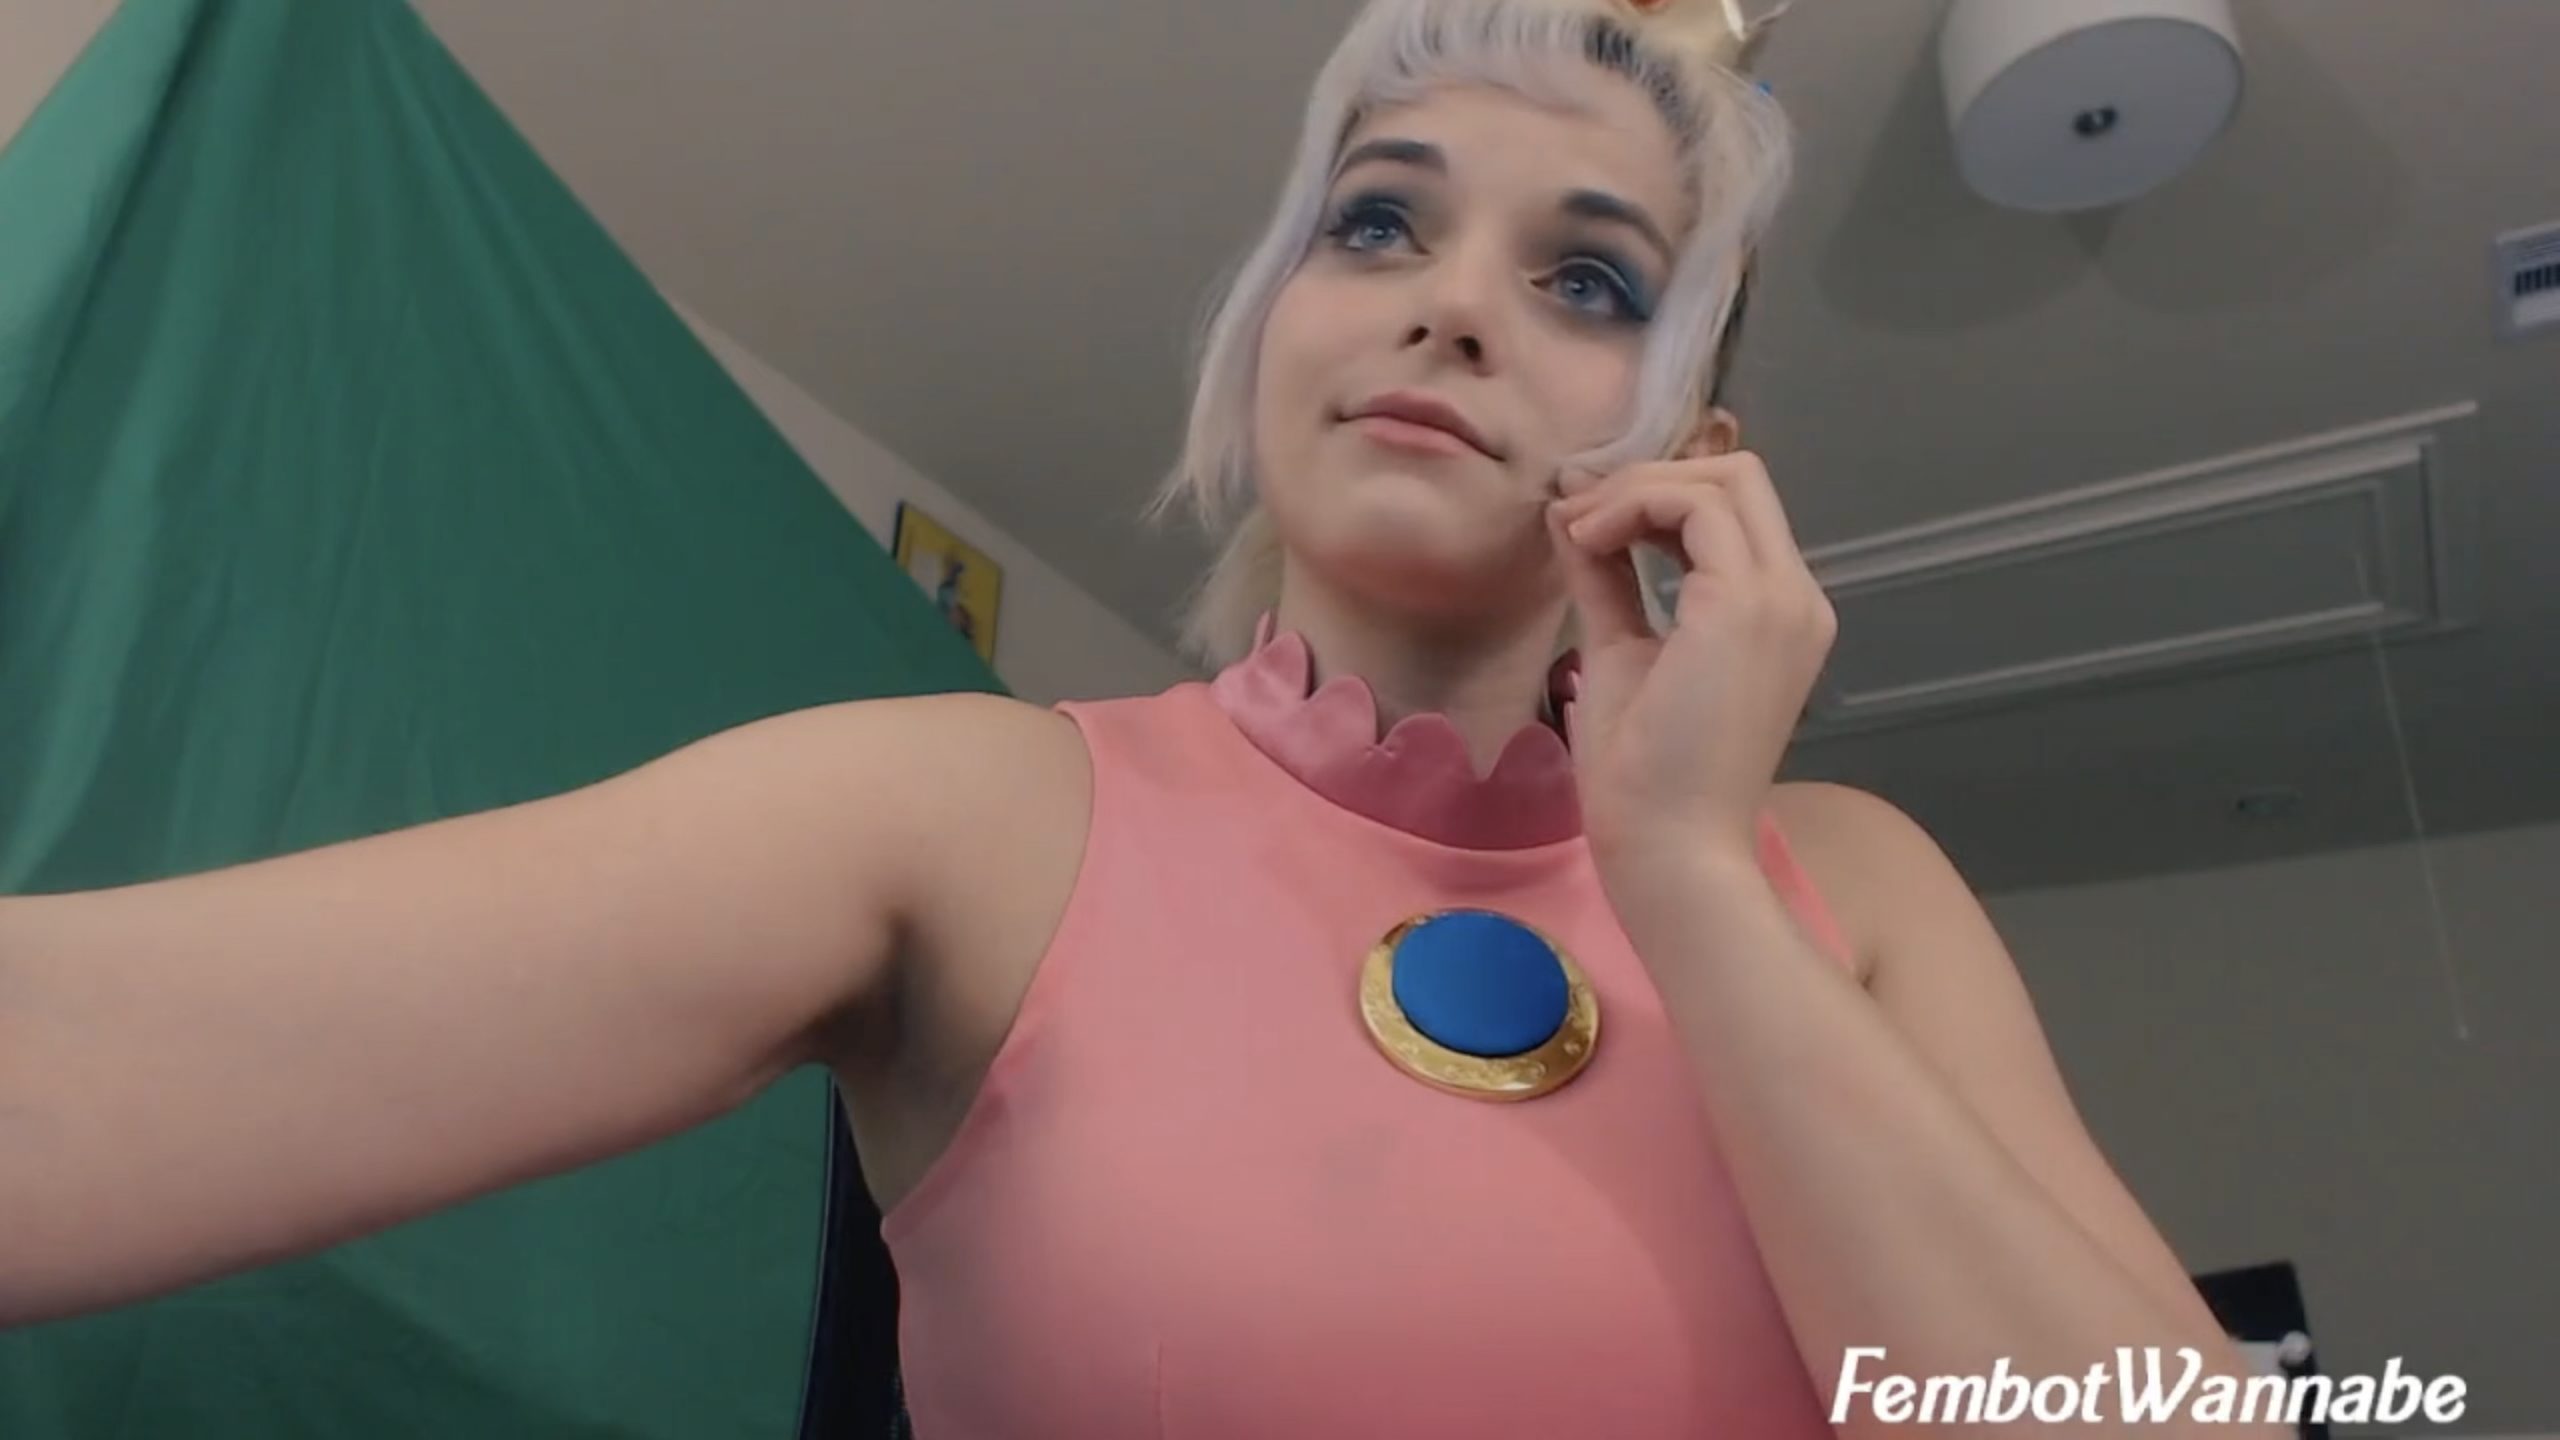 FembotWannabe Is In Need Of A Rescue As Princess Peach